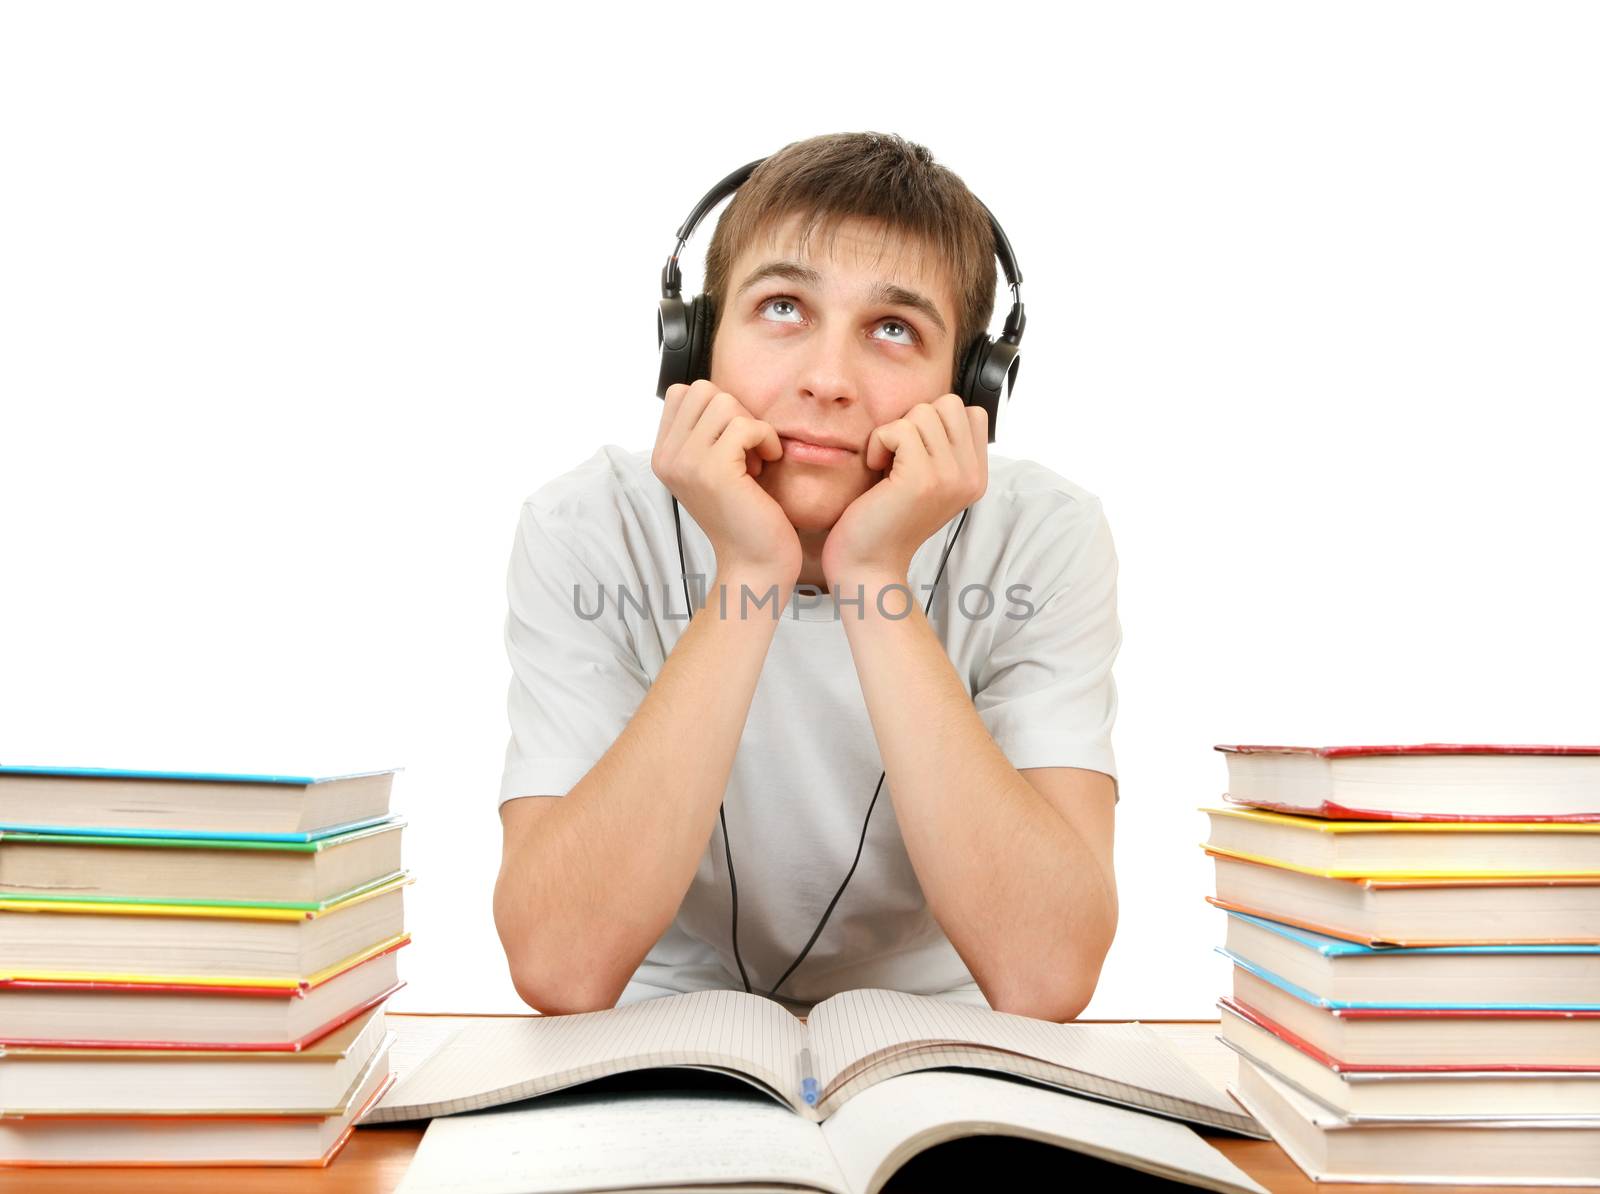 Bored Student in Headphones by sabphoto